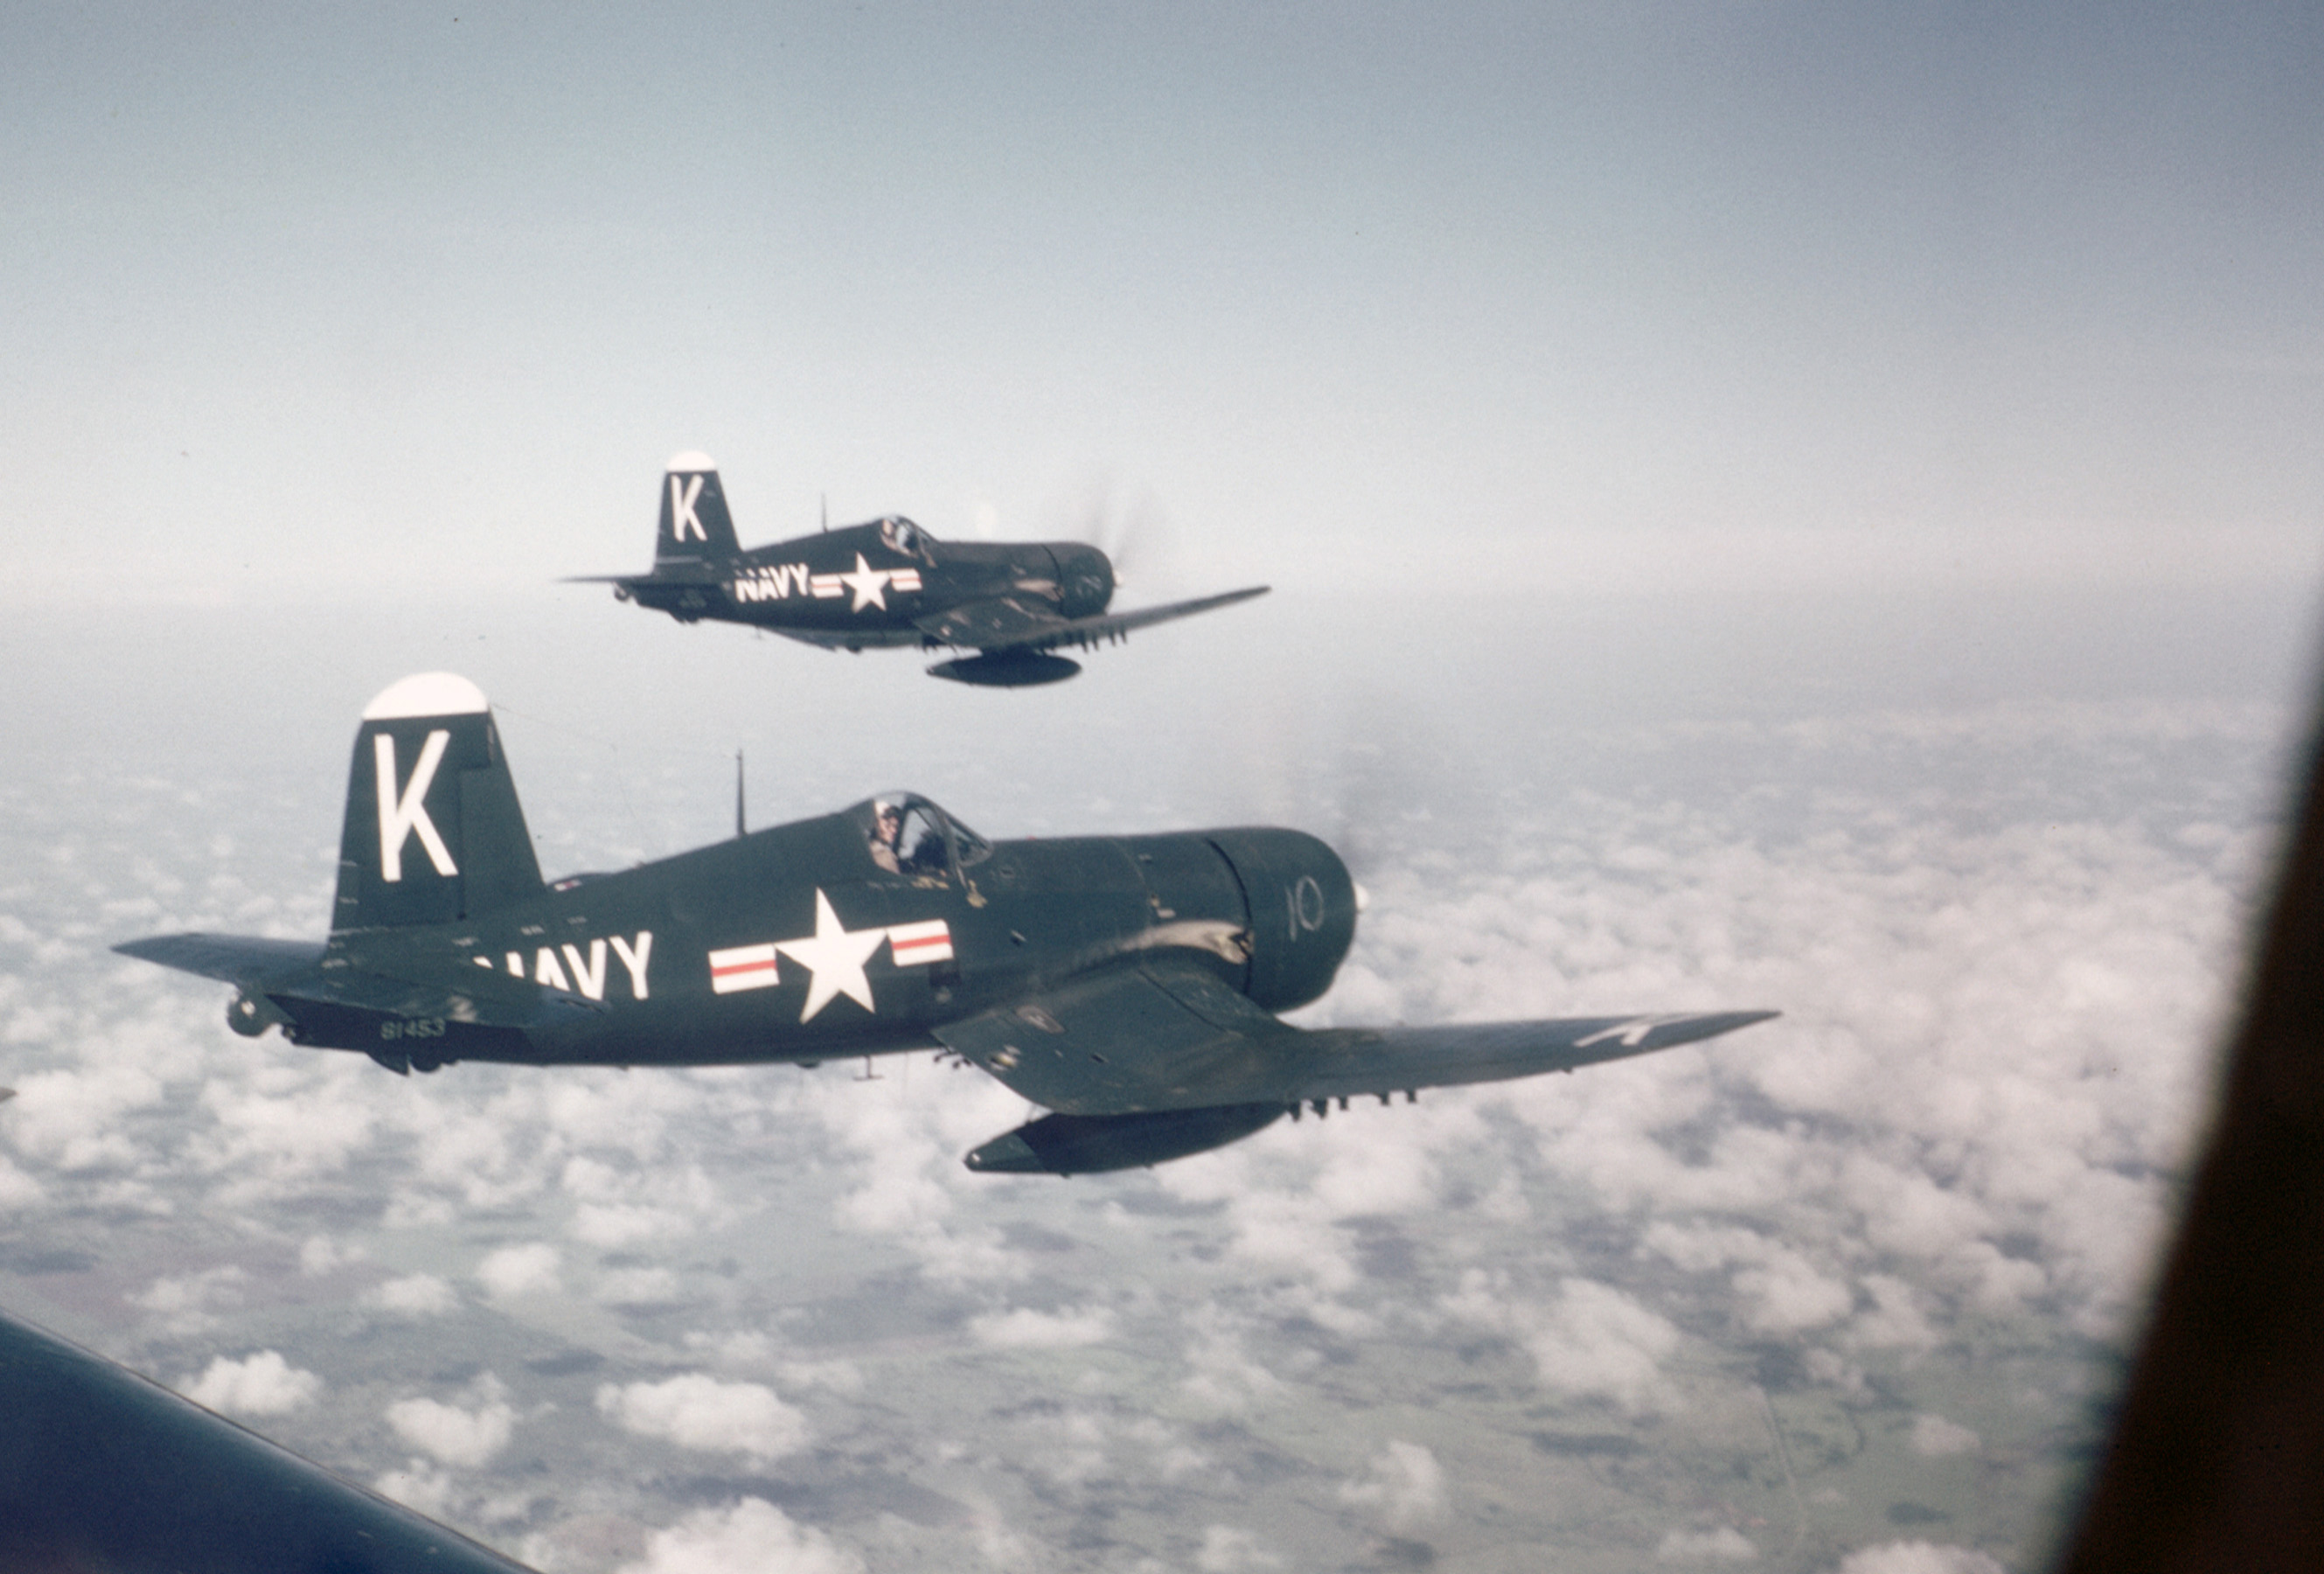 F4U-4 Corsairs similar to those flown by Brown and Hudner on that fateful day in December, 1950. (photo via Bryan Makos)